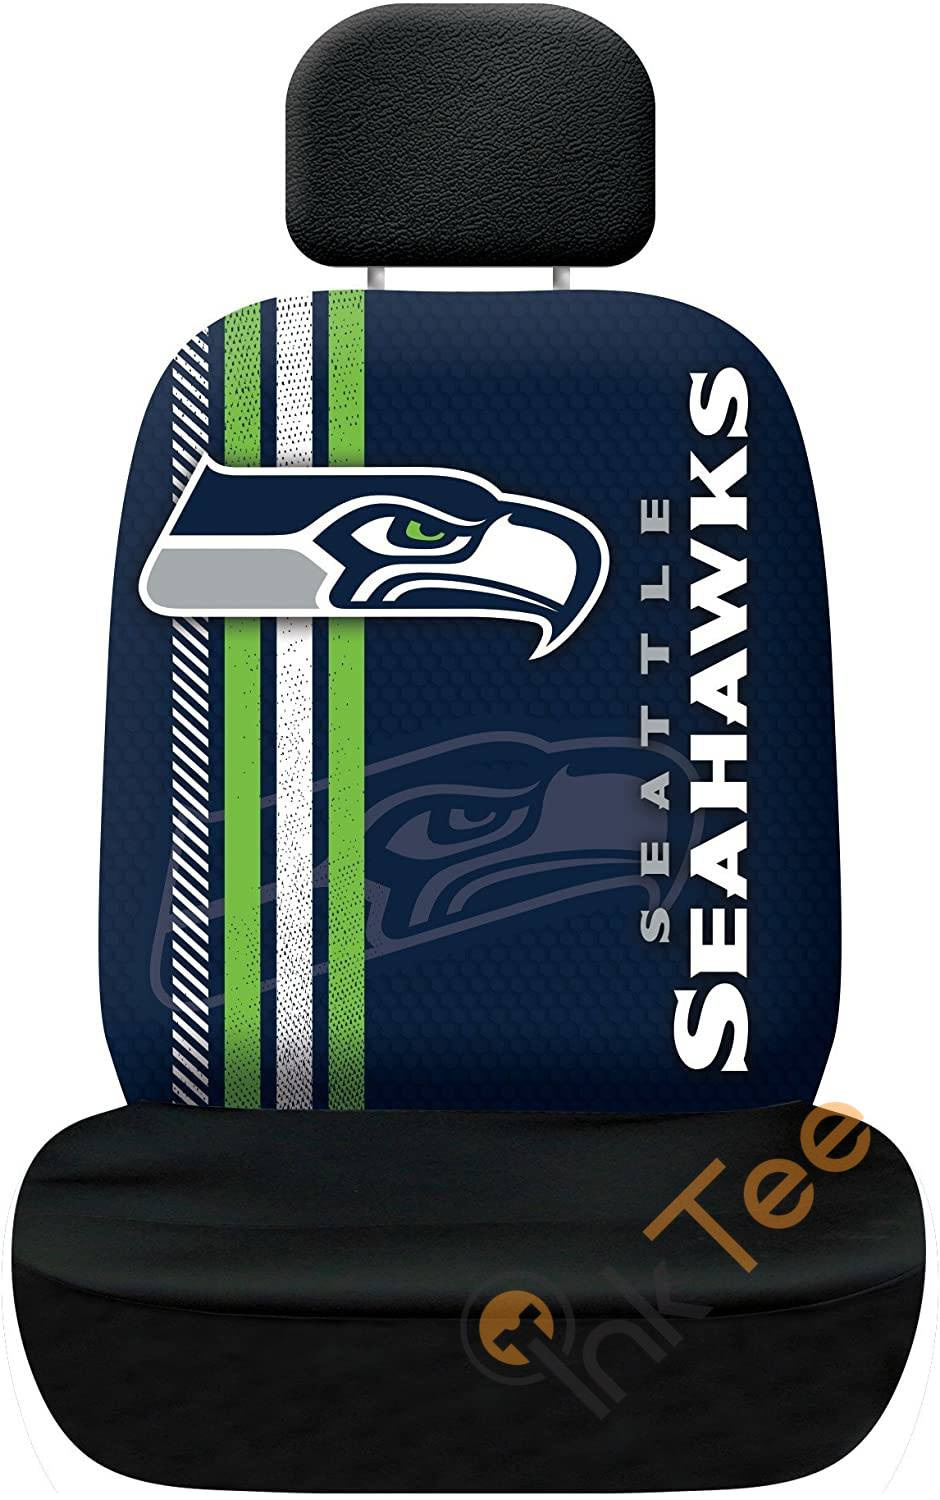 Nfl Seattle Seahawks Team Seat Cover